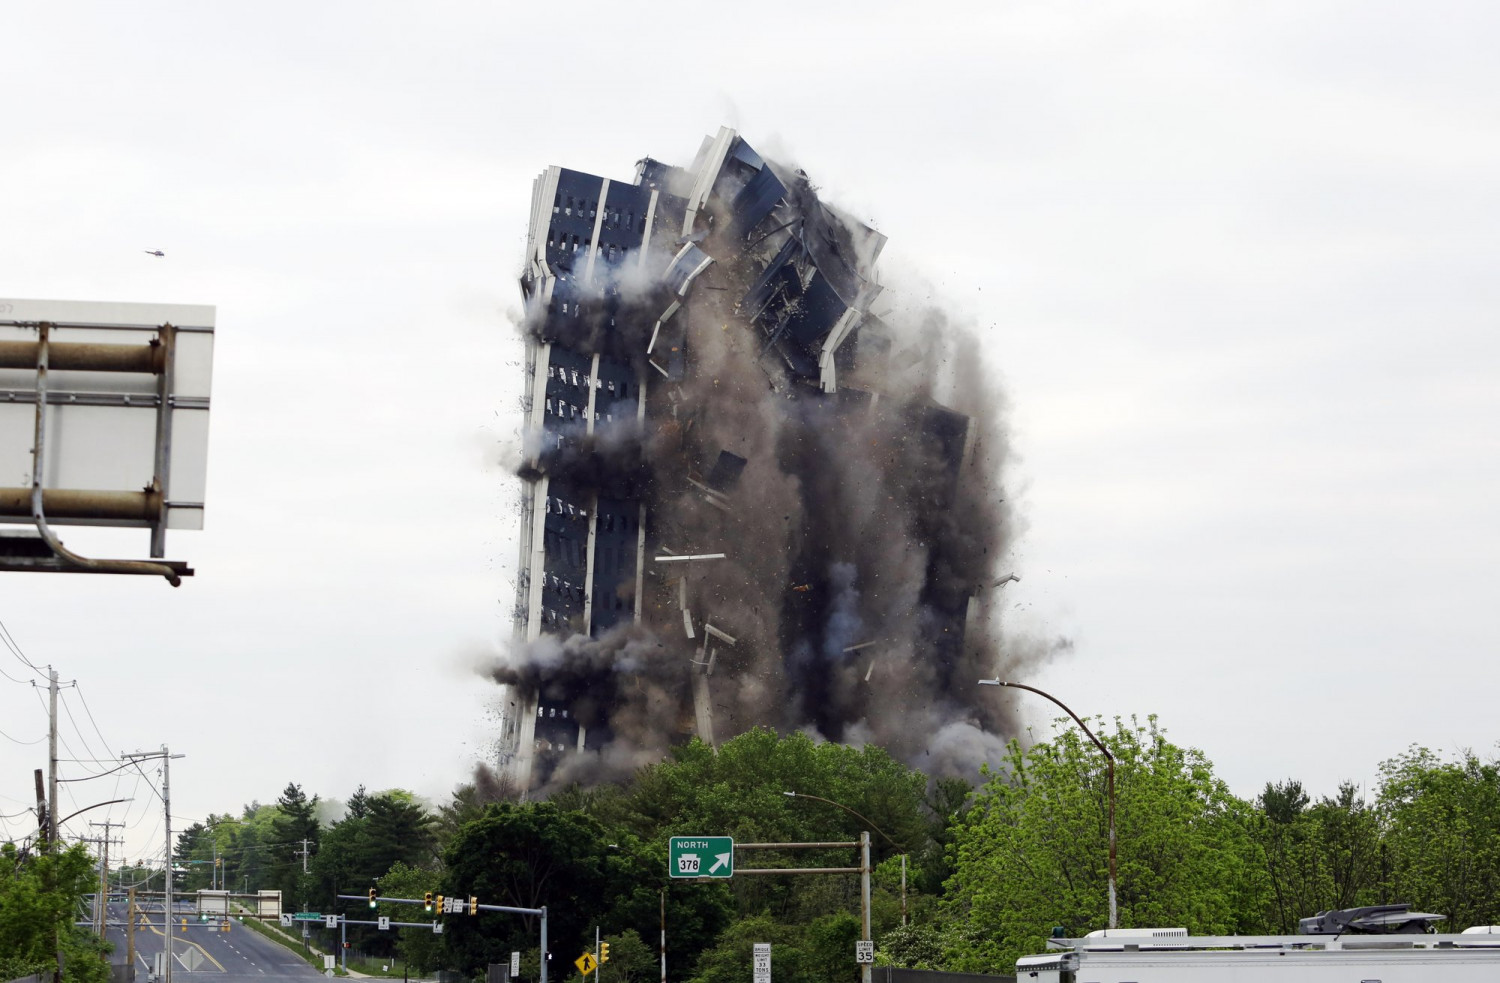 Video: Defunct Steelmaker’s 21-story Headquarters Imploded